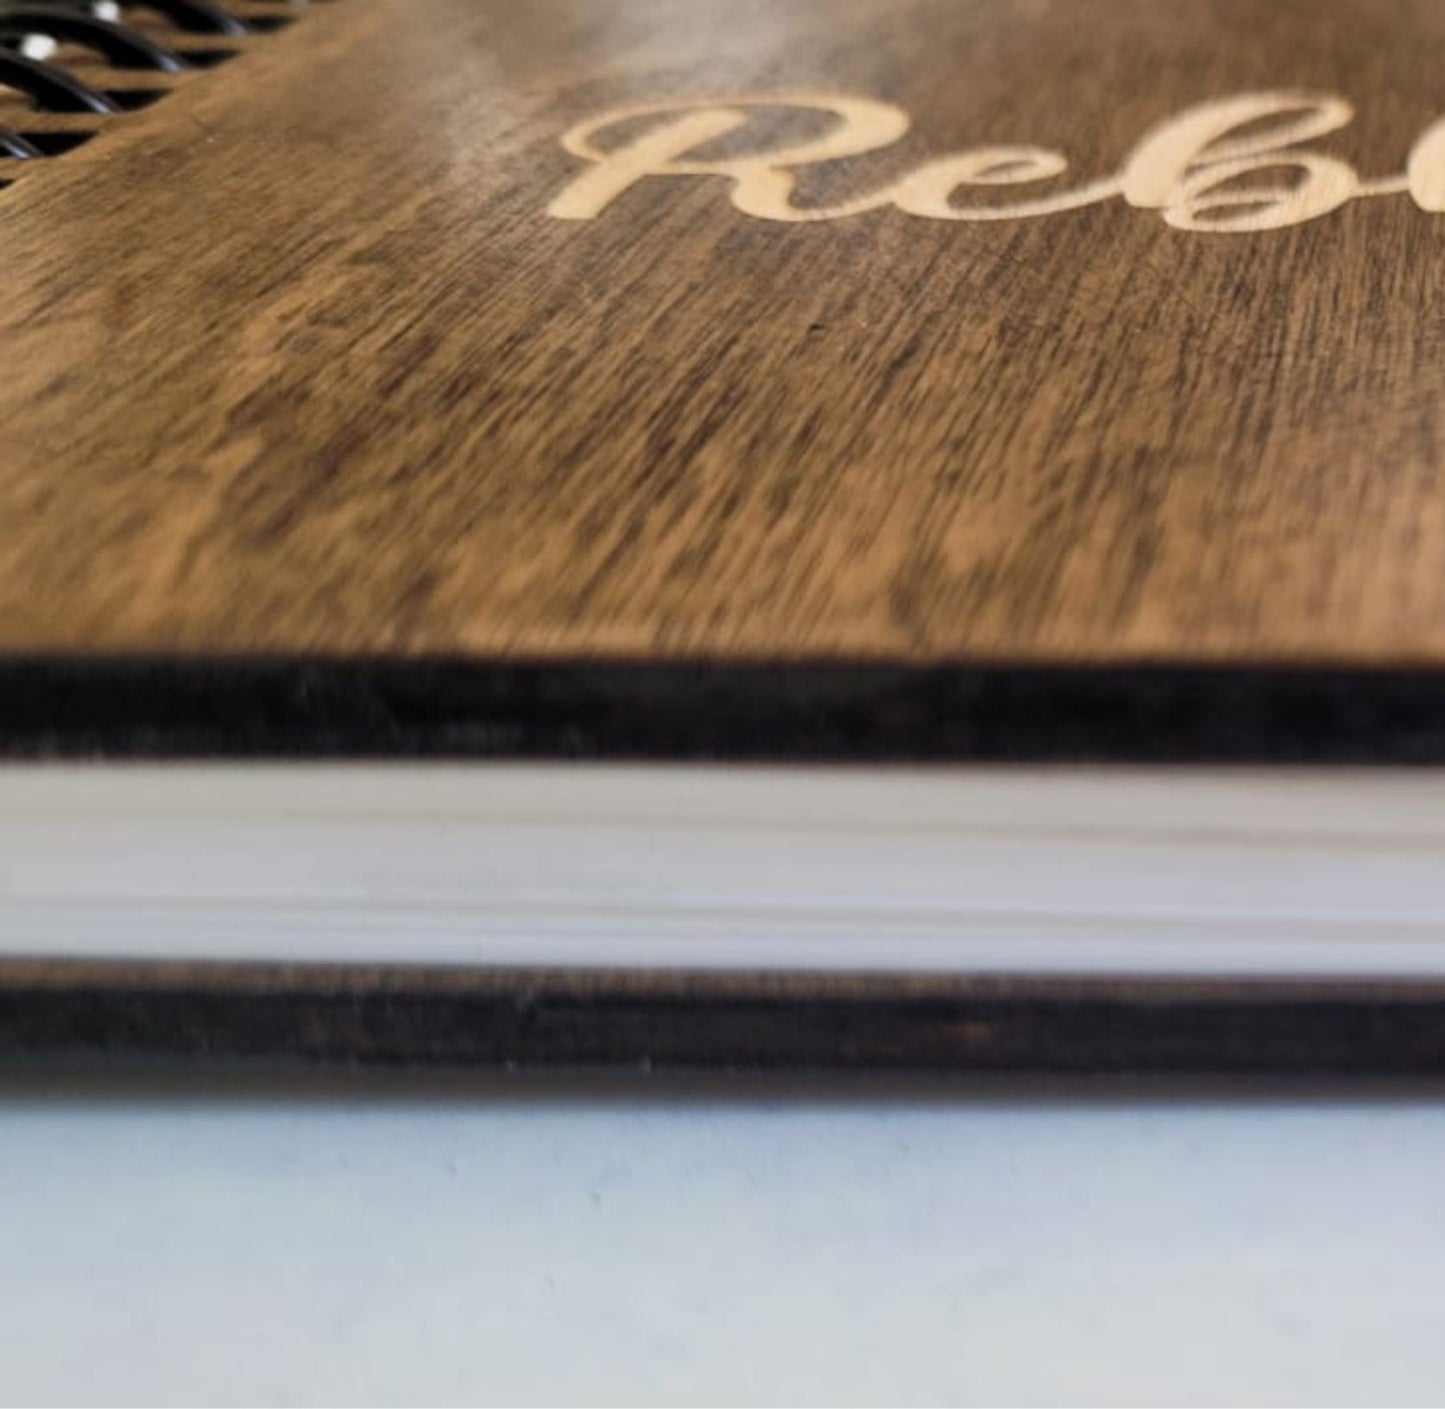 Our custom Wooden Notebooks are made to last. We stain and seal the laser engraved wooden front and back cover. Available from our store in Dublin, we also ship nationwide.